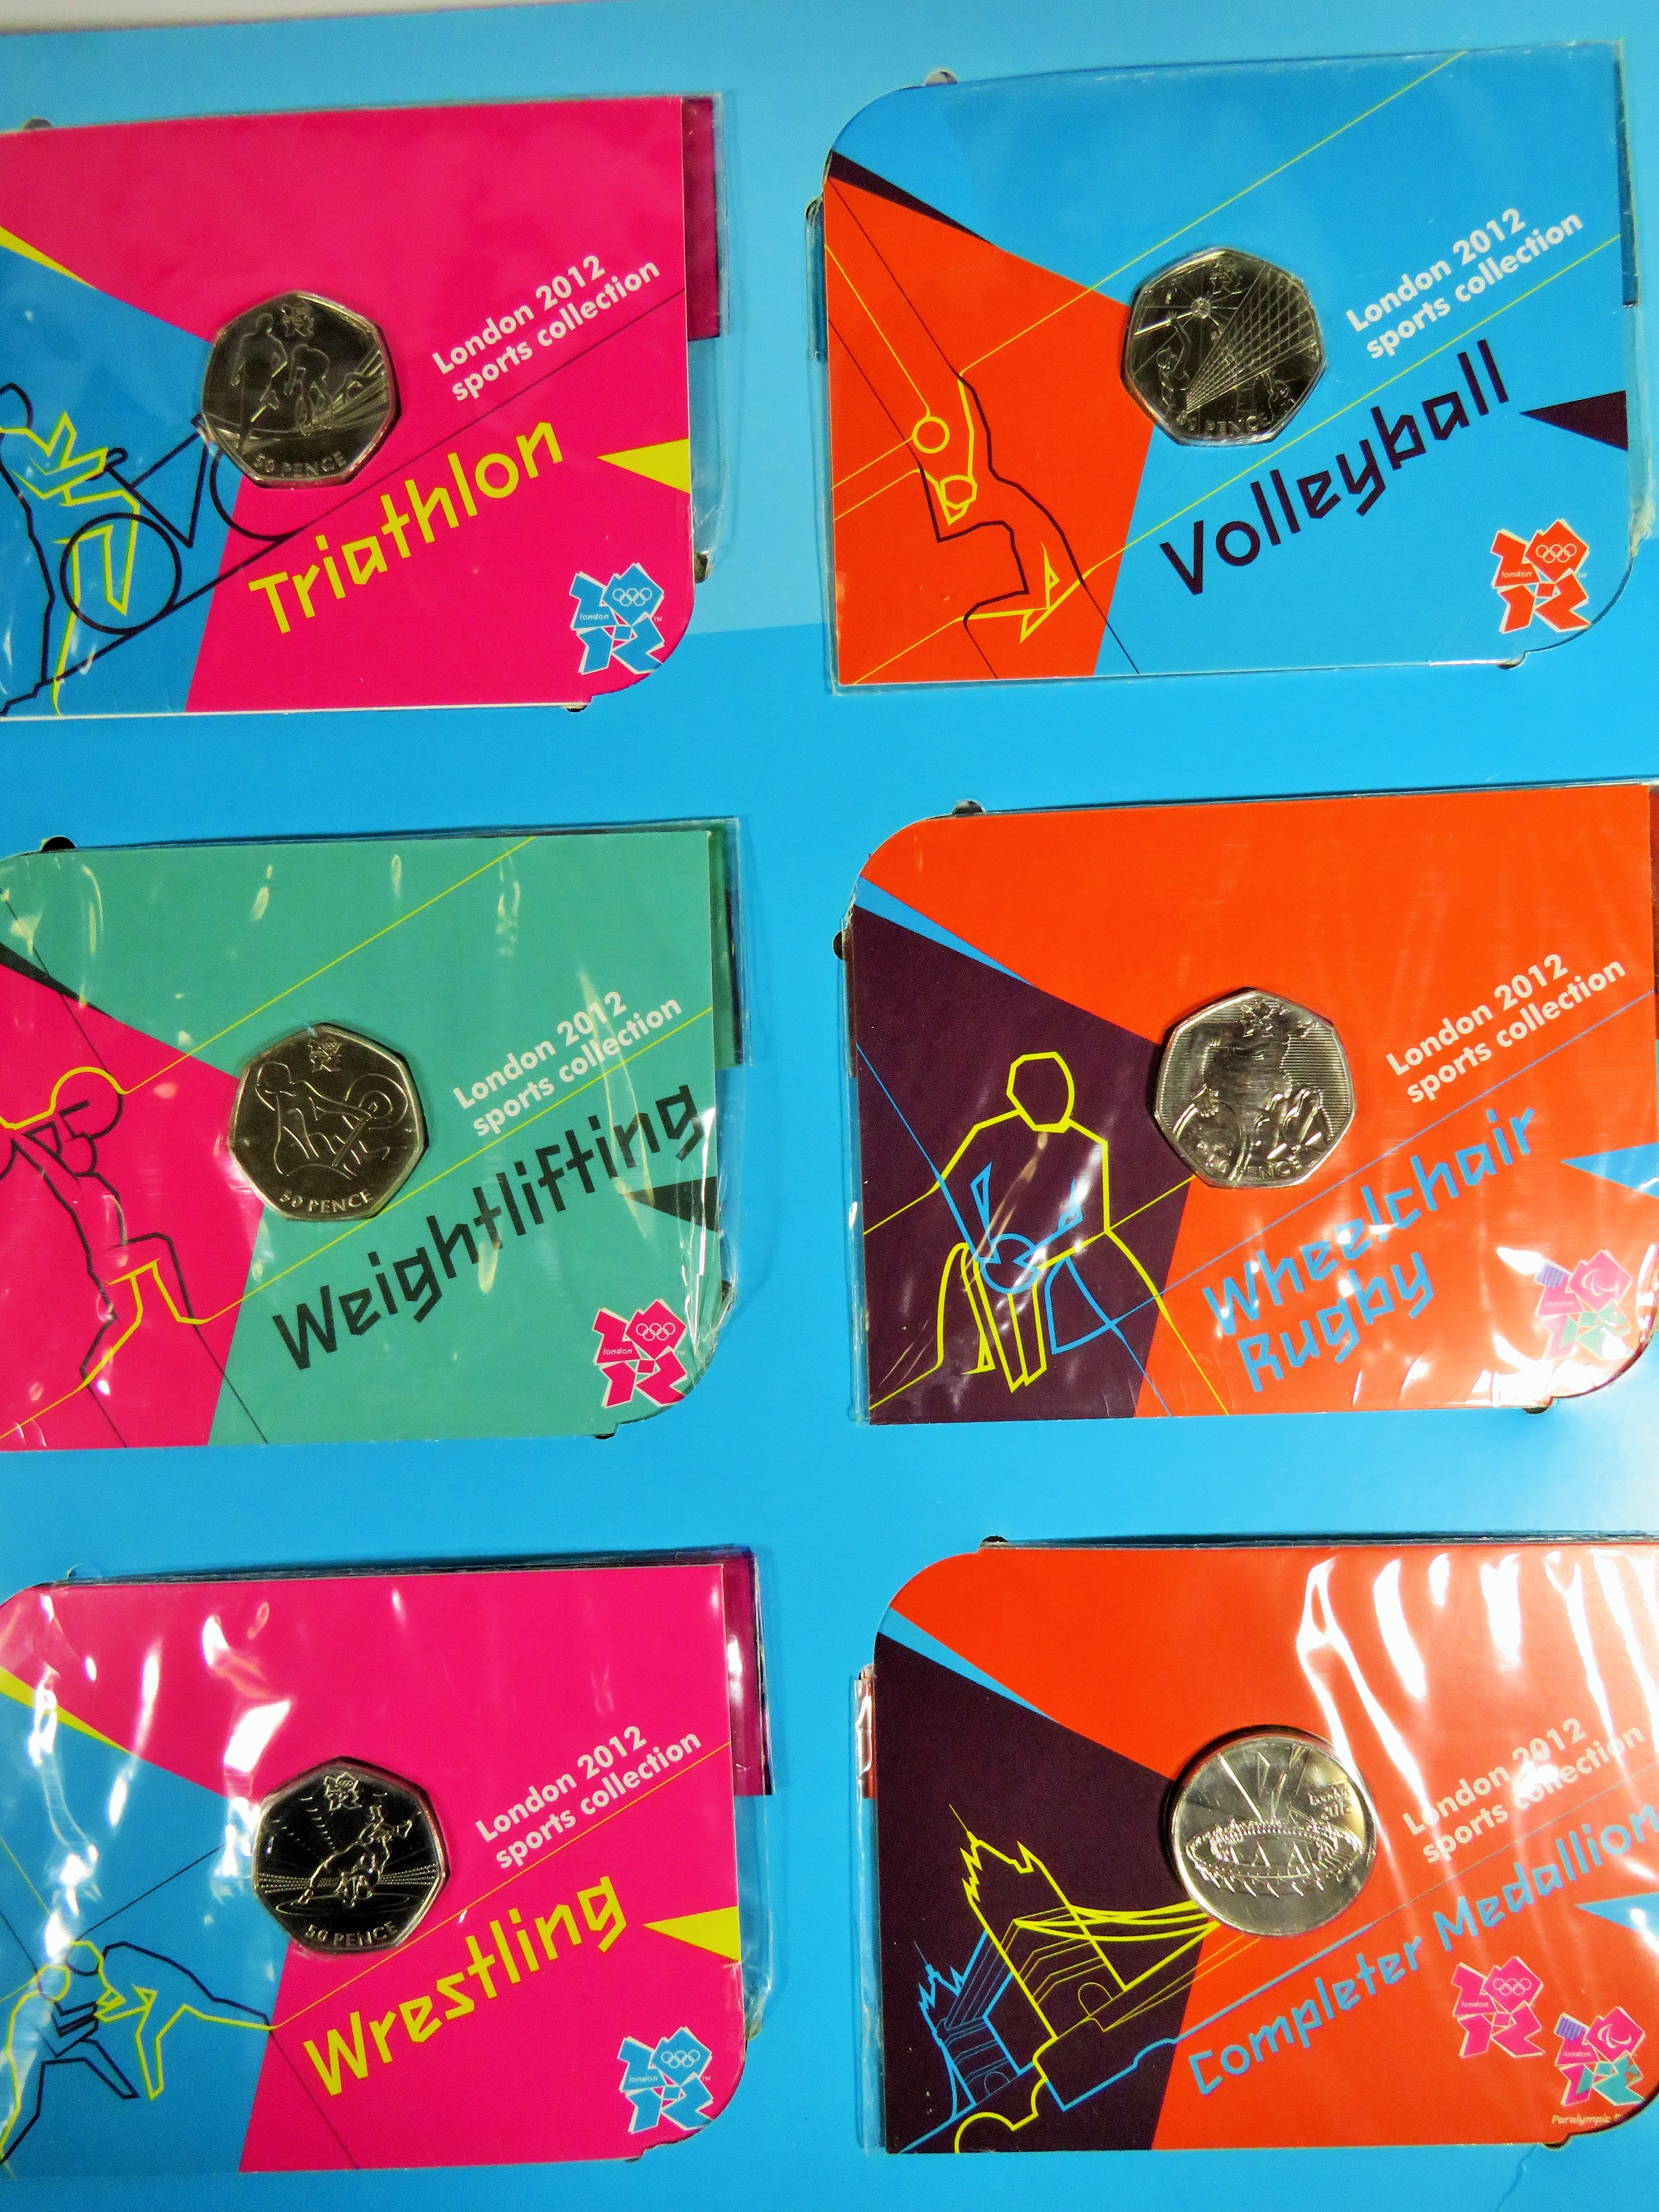 Royal Mint 2012 Collectors album of 50p coins to commemorate the 2012 Olympics. 24 Coins, each to